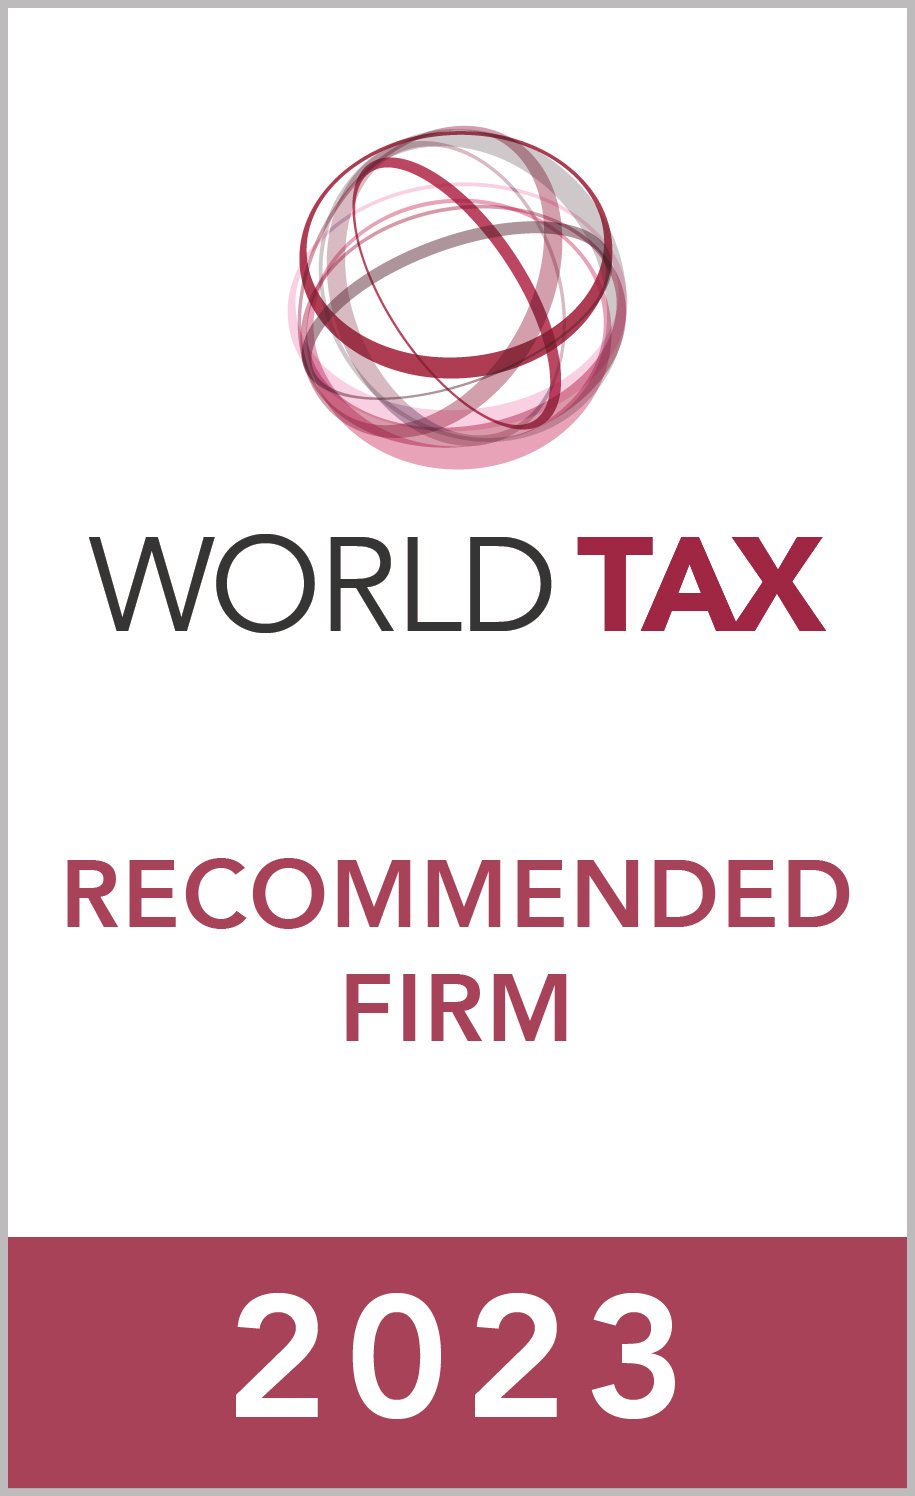 World tax recommended firm 2023